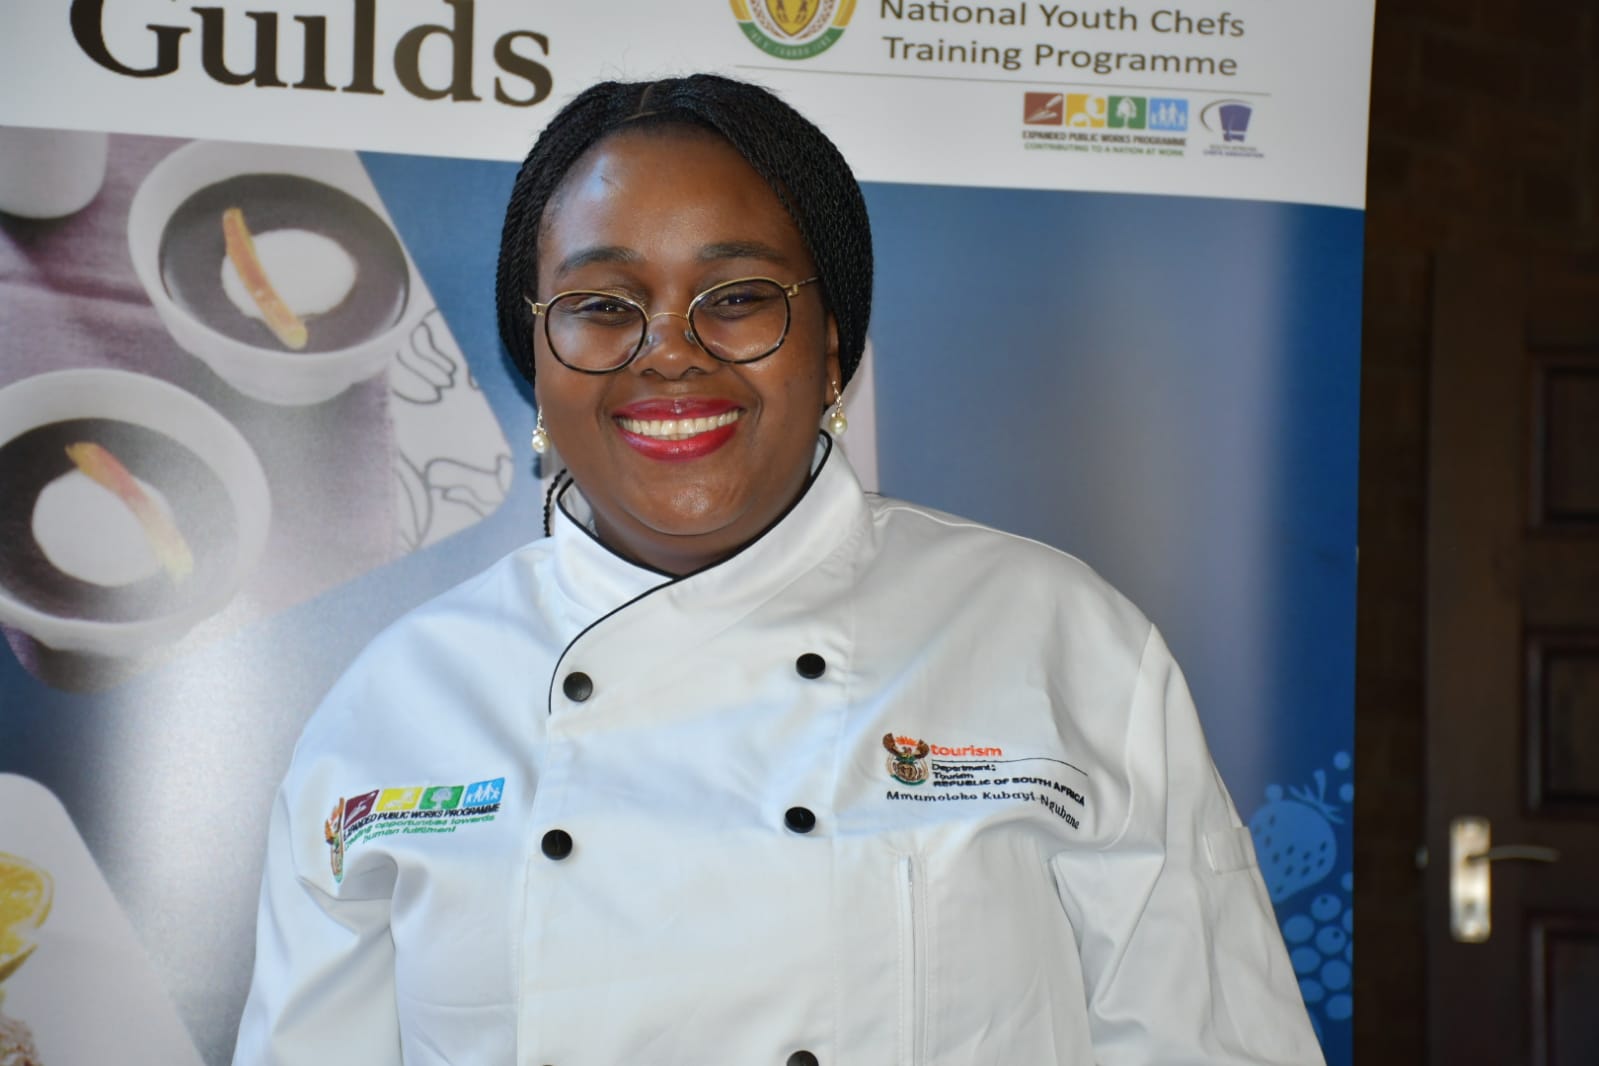 353 Youth will enter the tourism industry as world class chefs